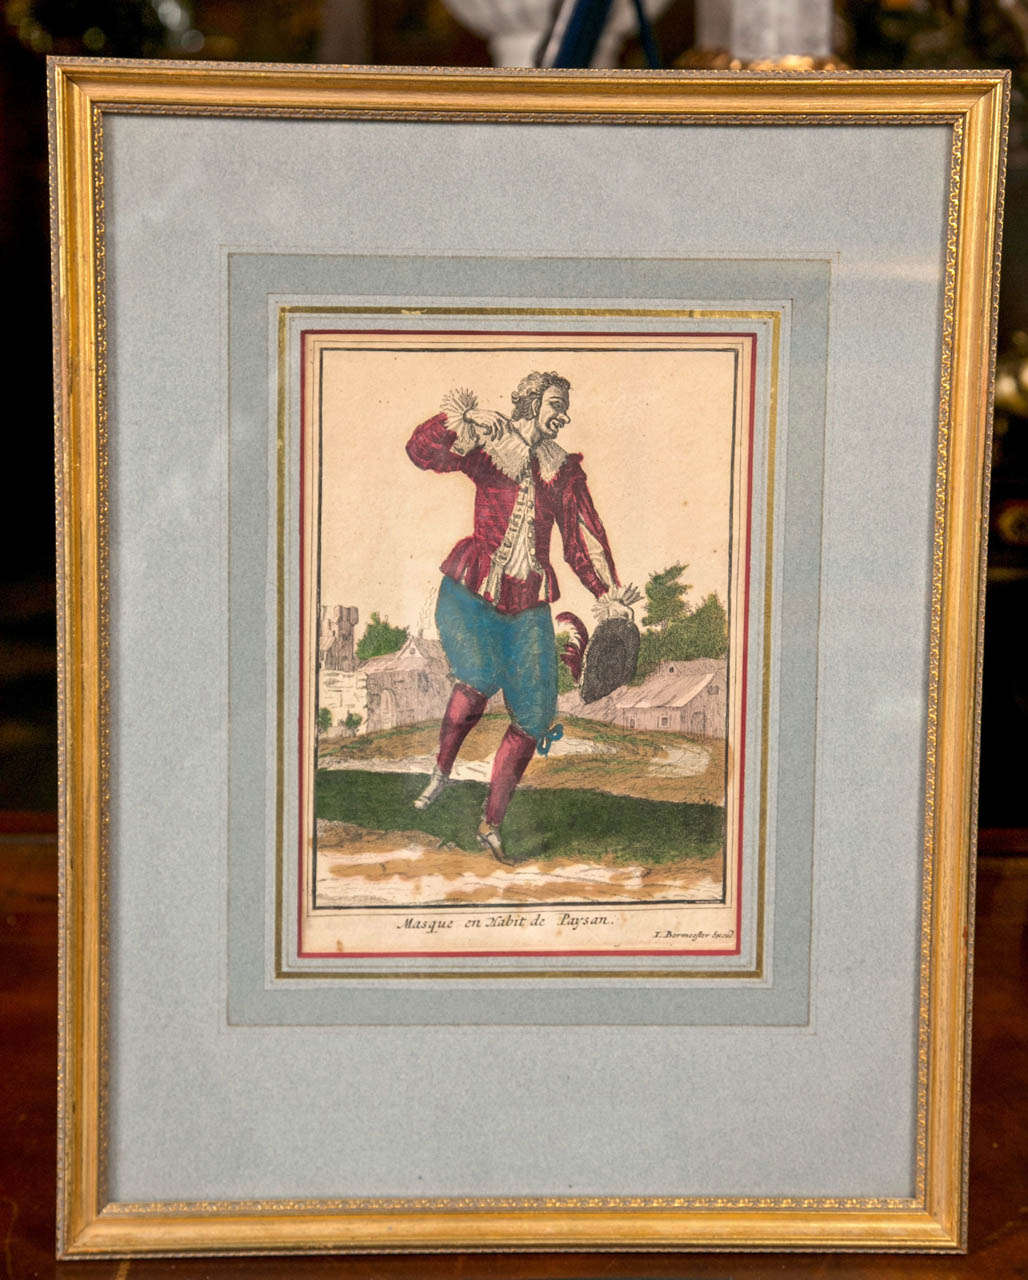 This set depicts the characters  and costumes from  L'Comedie d'Arte. Each is handcolored with an identification. They are hand colored engravings.  The cast includes: Joseph Tortorini, as Scarmouche; Docteur  Baloyard;  Habit de Paysan (2 of